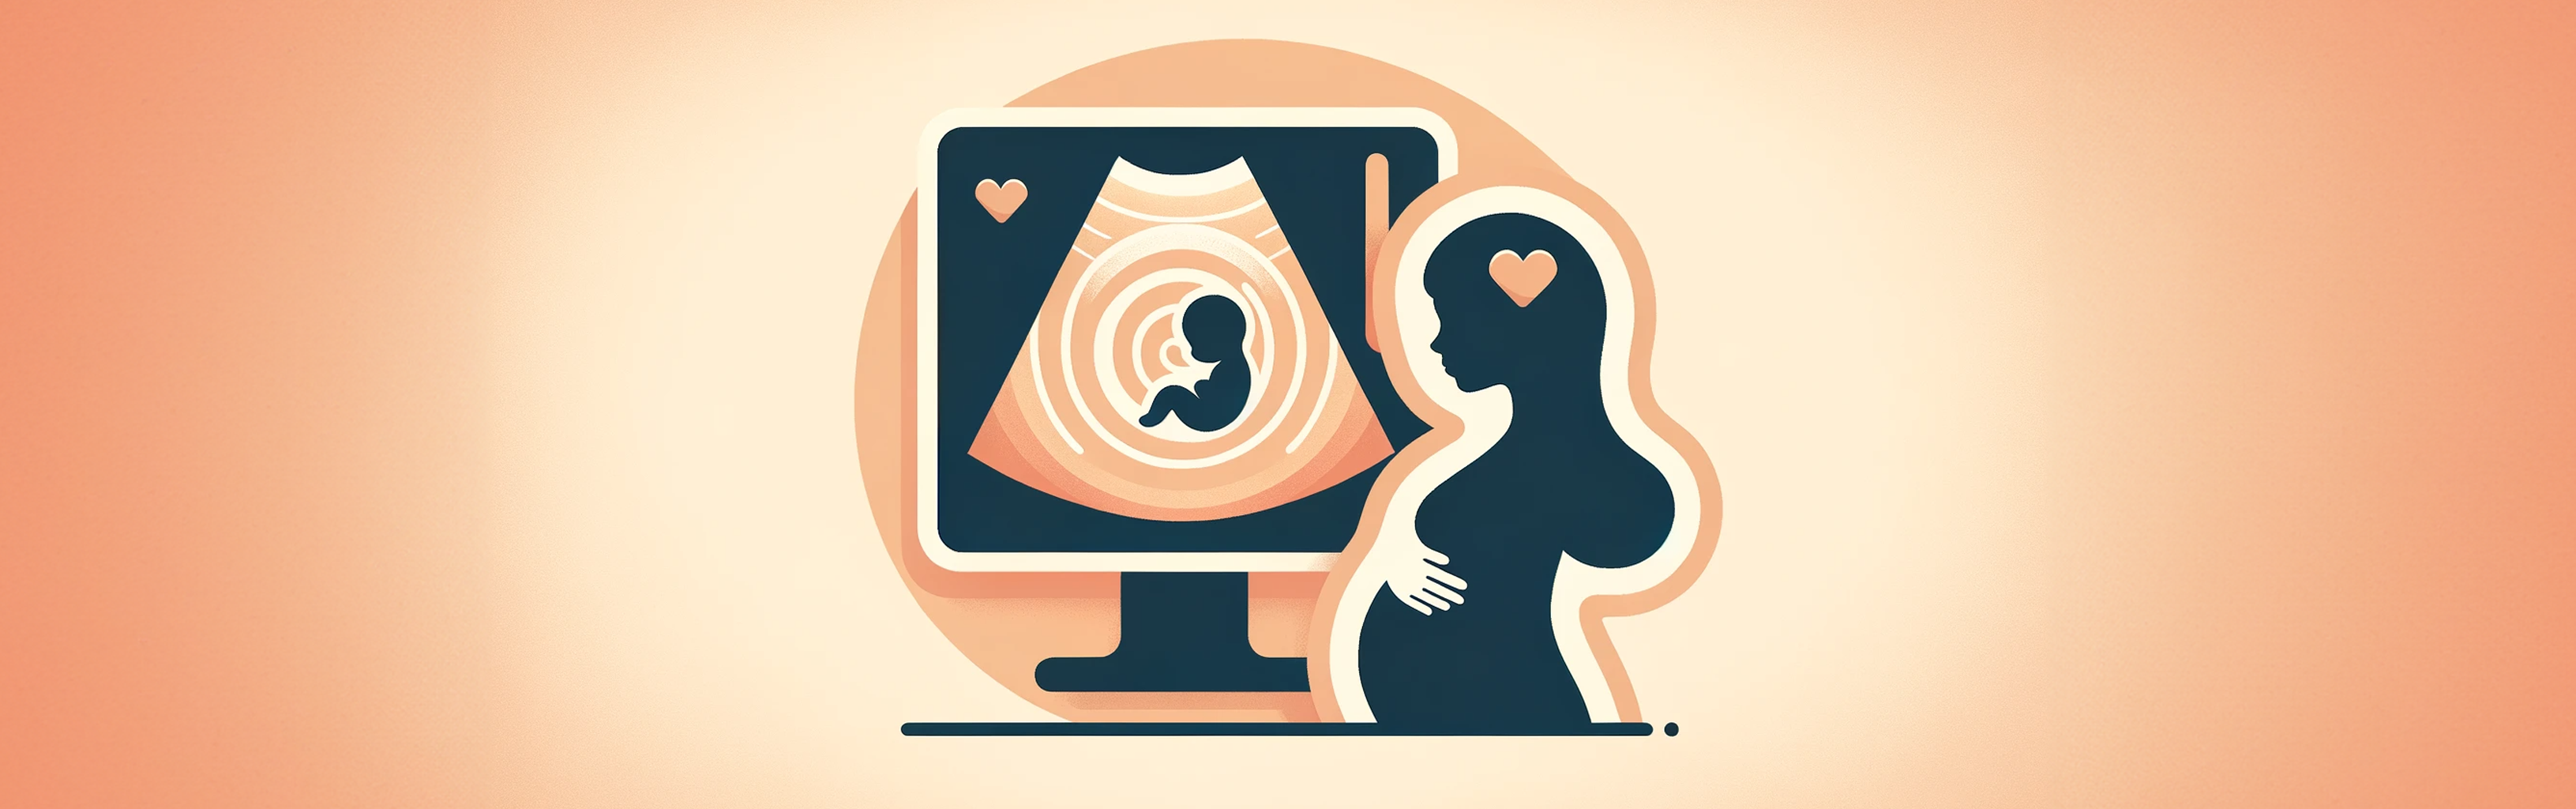 Graphic of Week 5 of pregnancy. An illustration of a baby in the ultrasound machine.